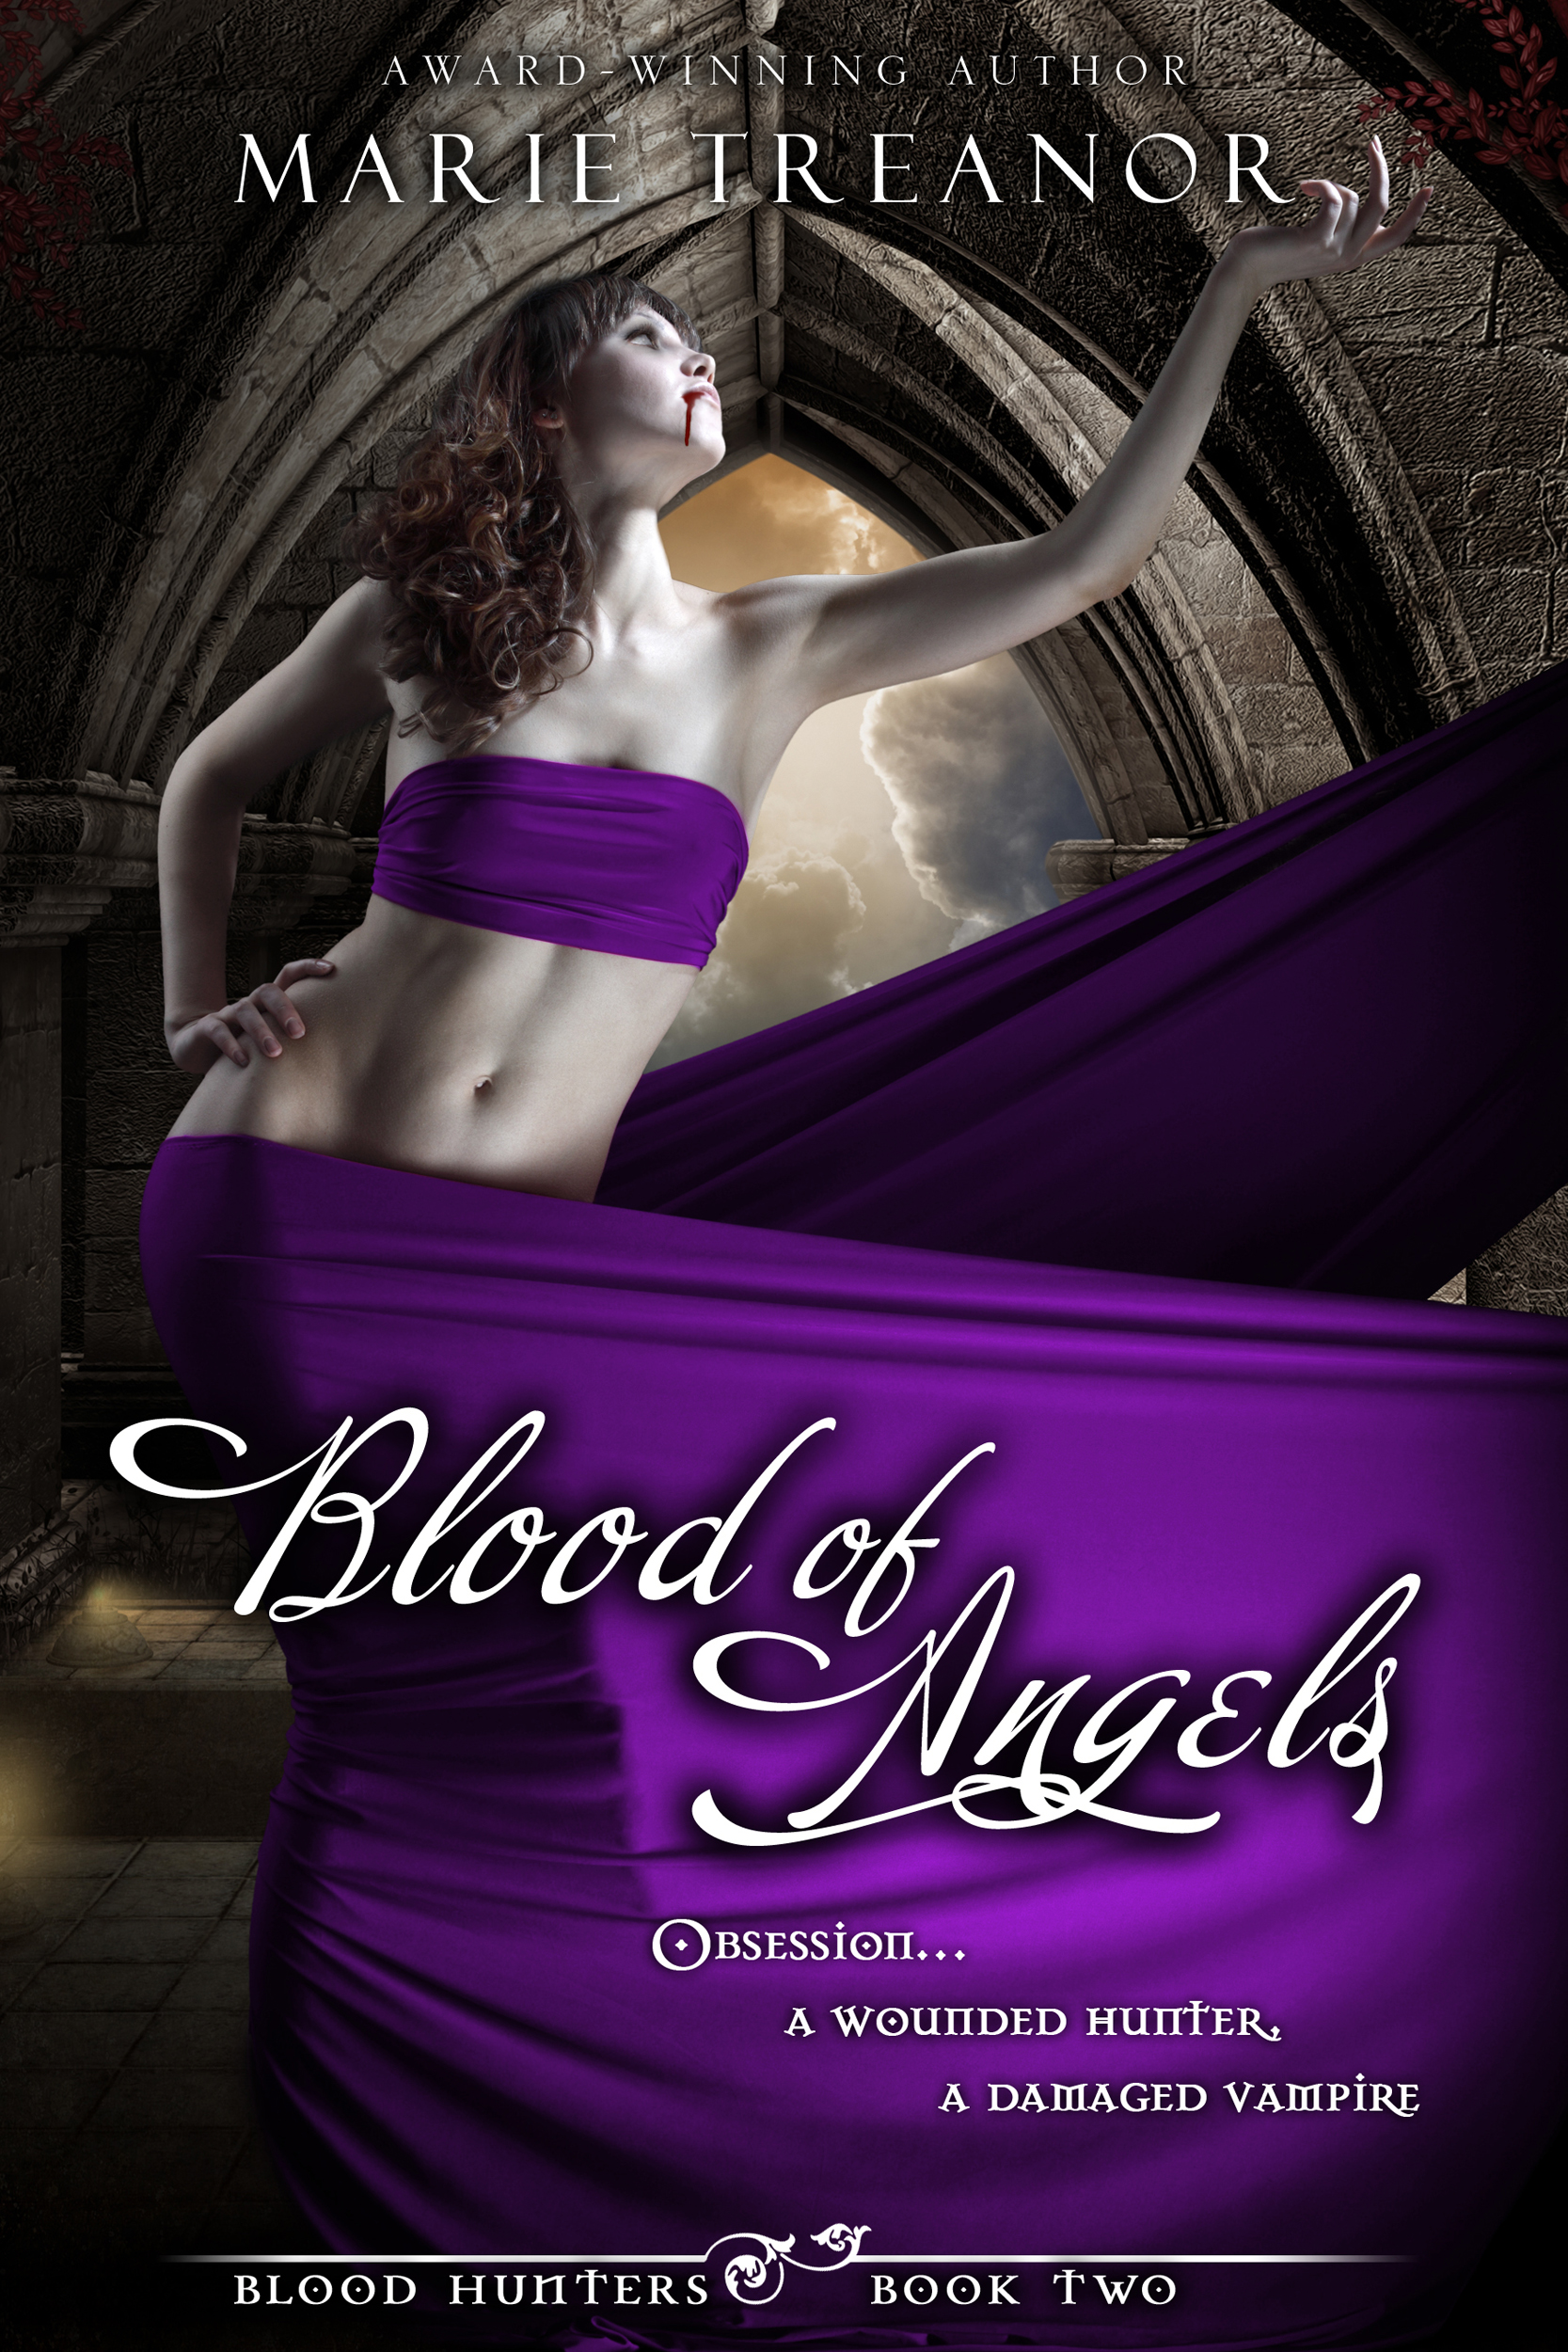 Blood of Angels